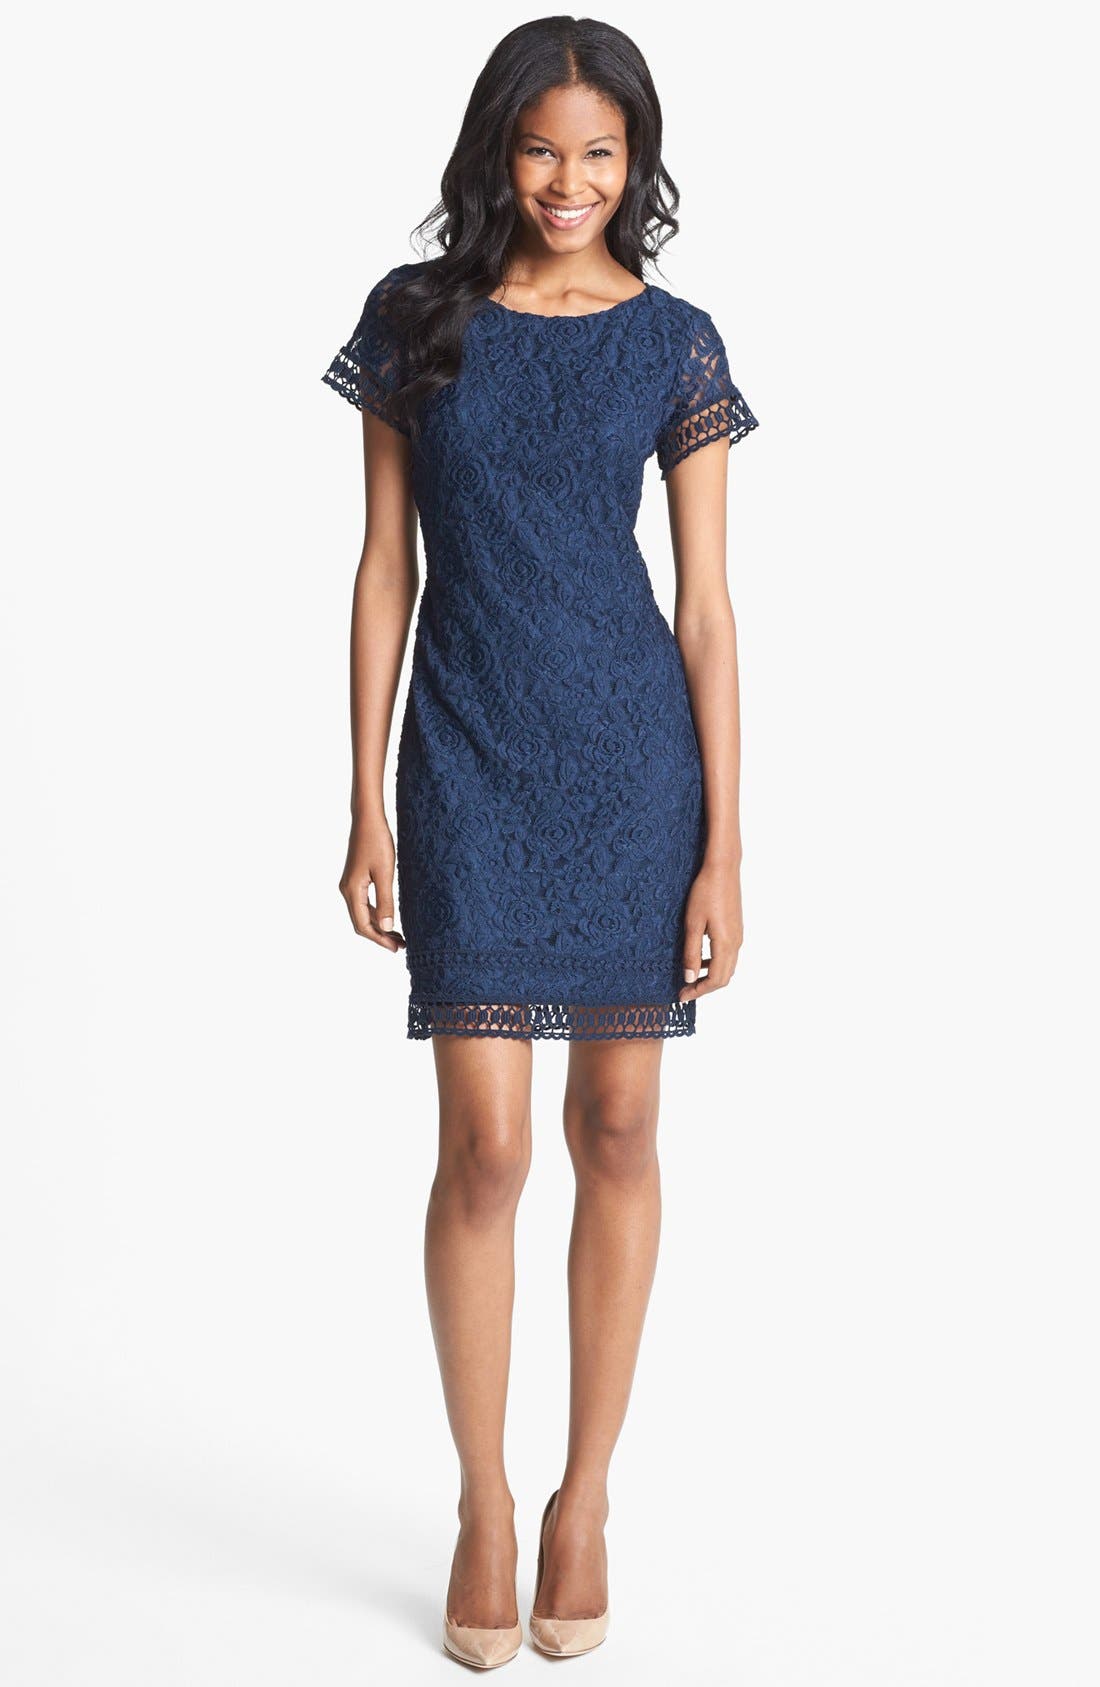 nordstrom clearance dresses